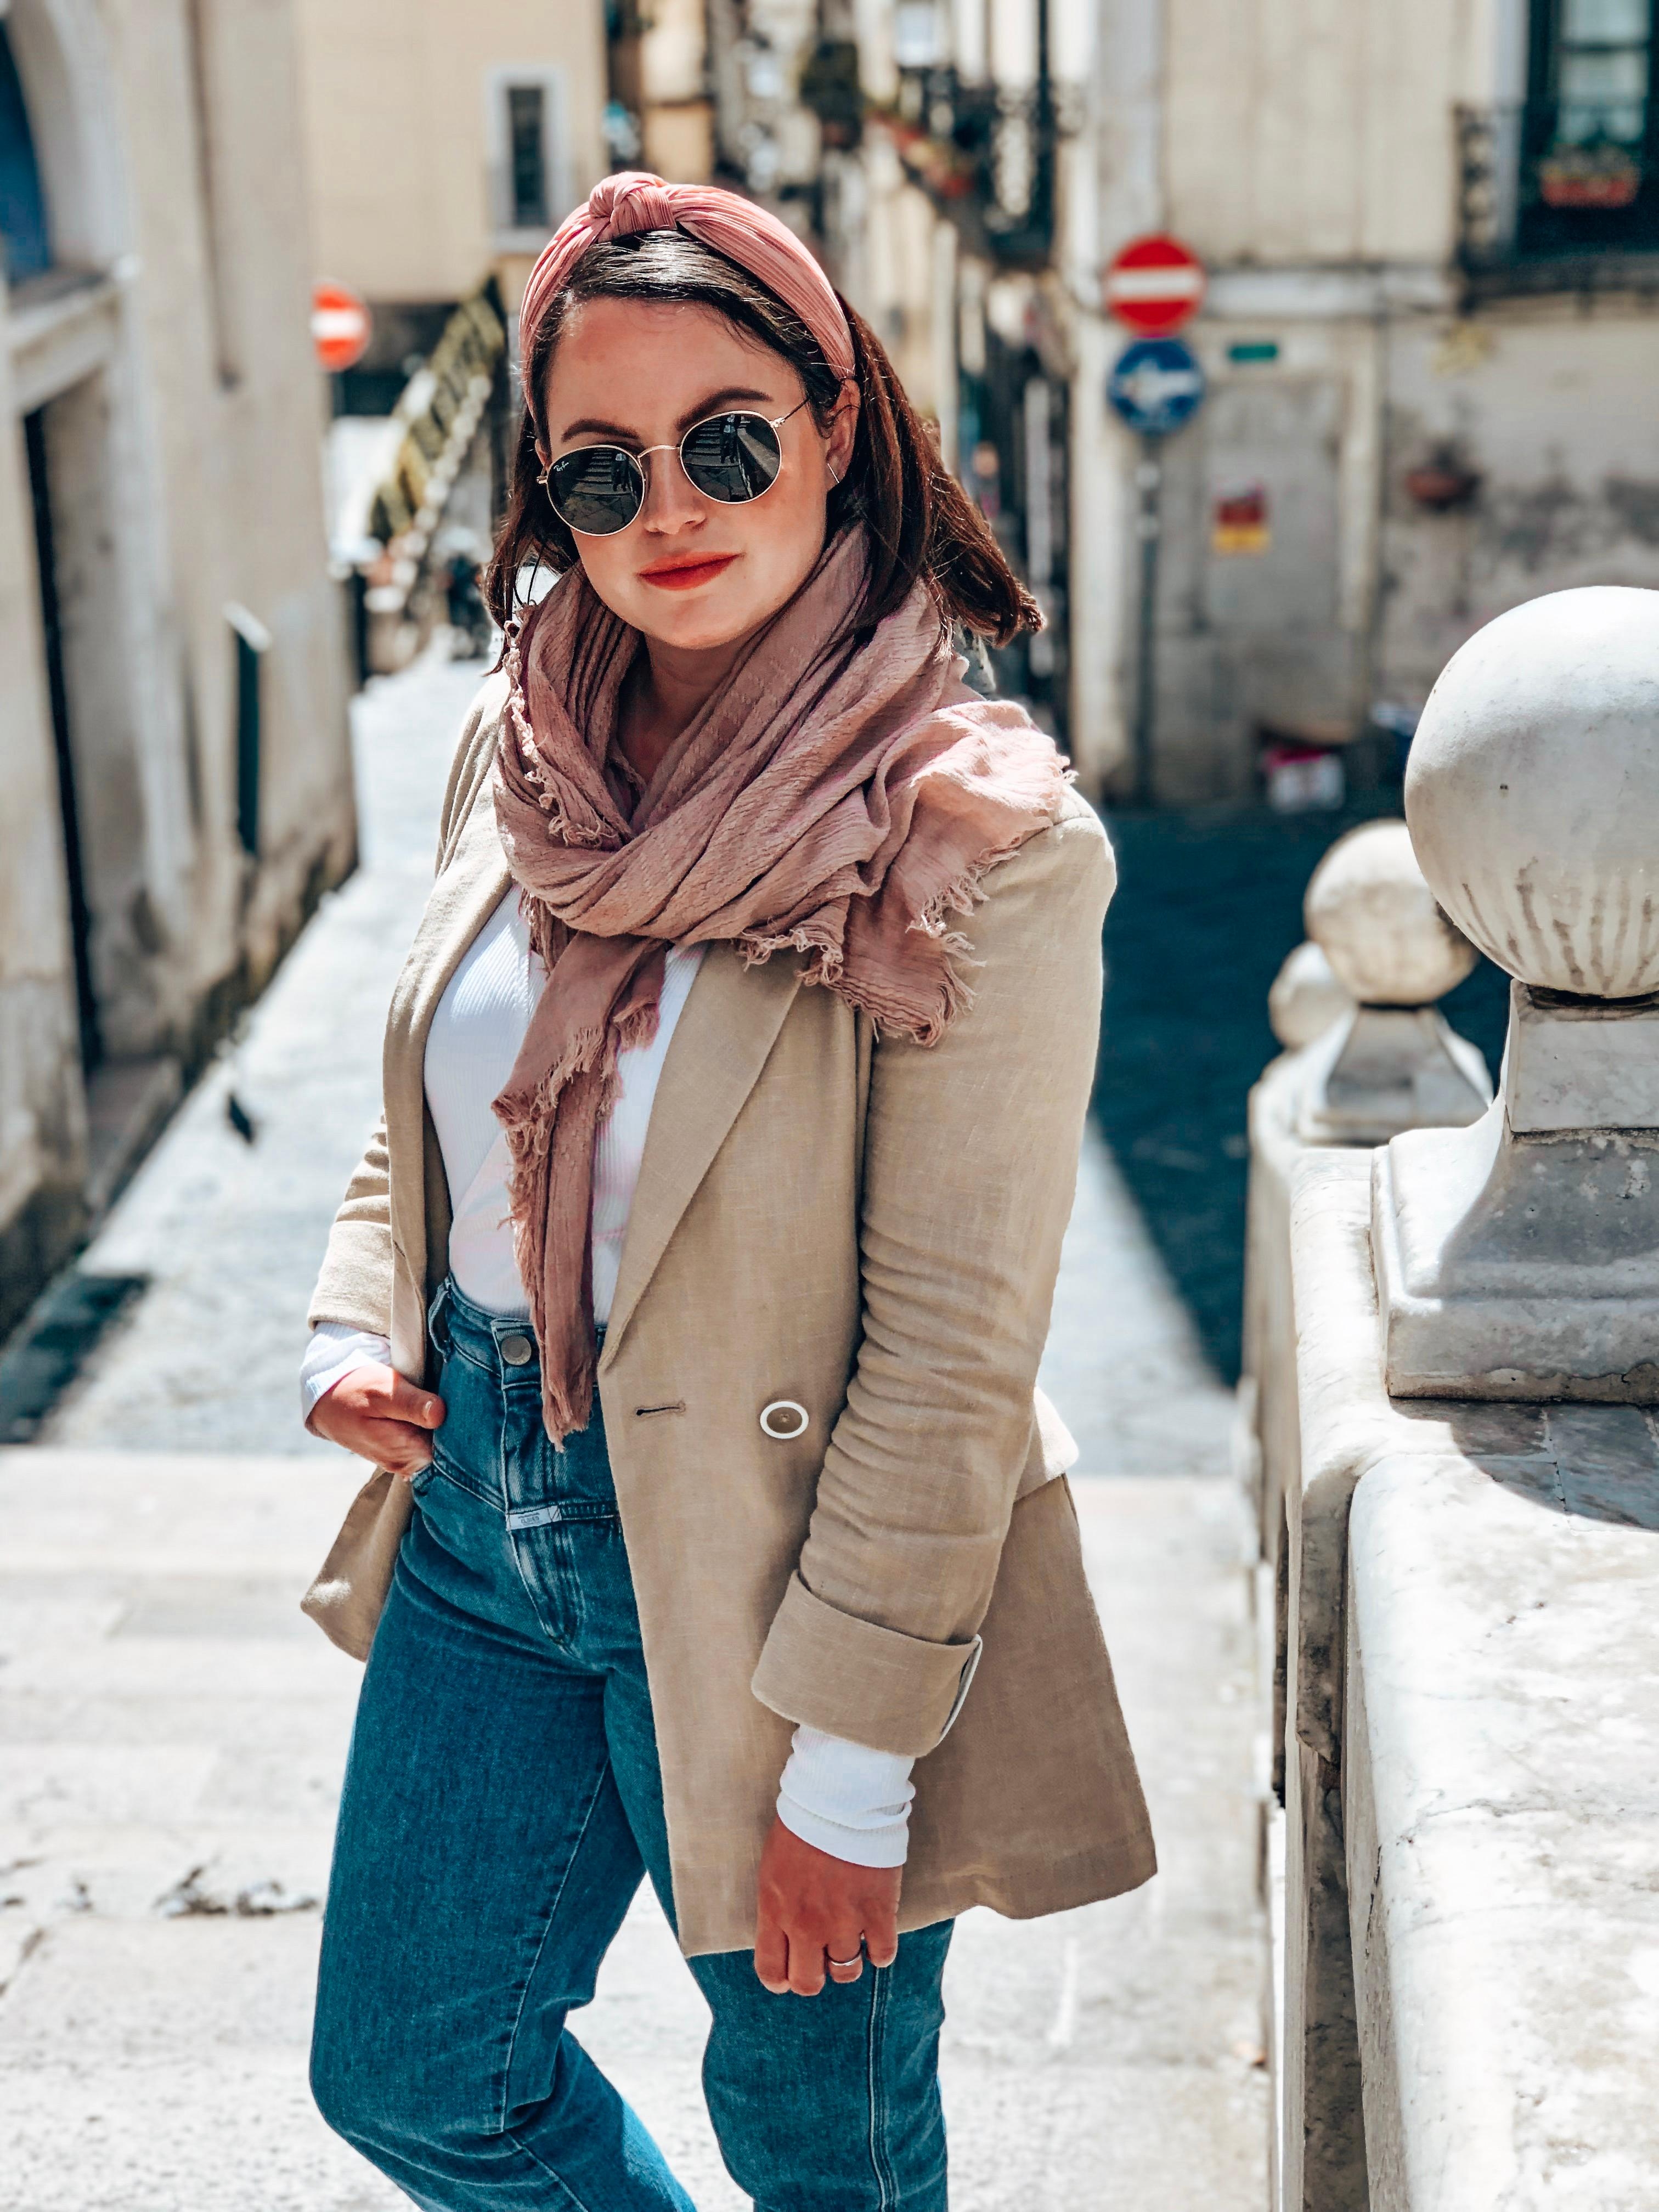 In the Streets of Italy

#jeanslover #closedjeans #leinenblazer #fashionlover #outfitinspo